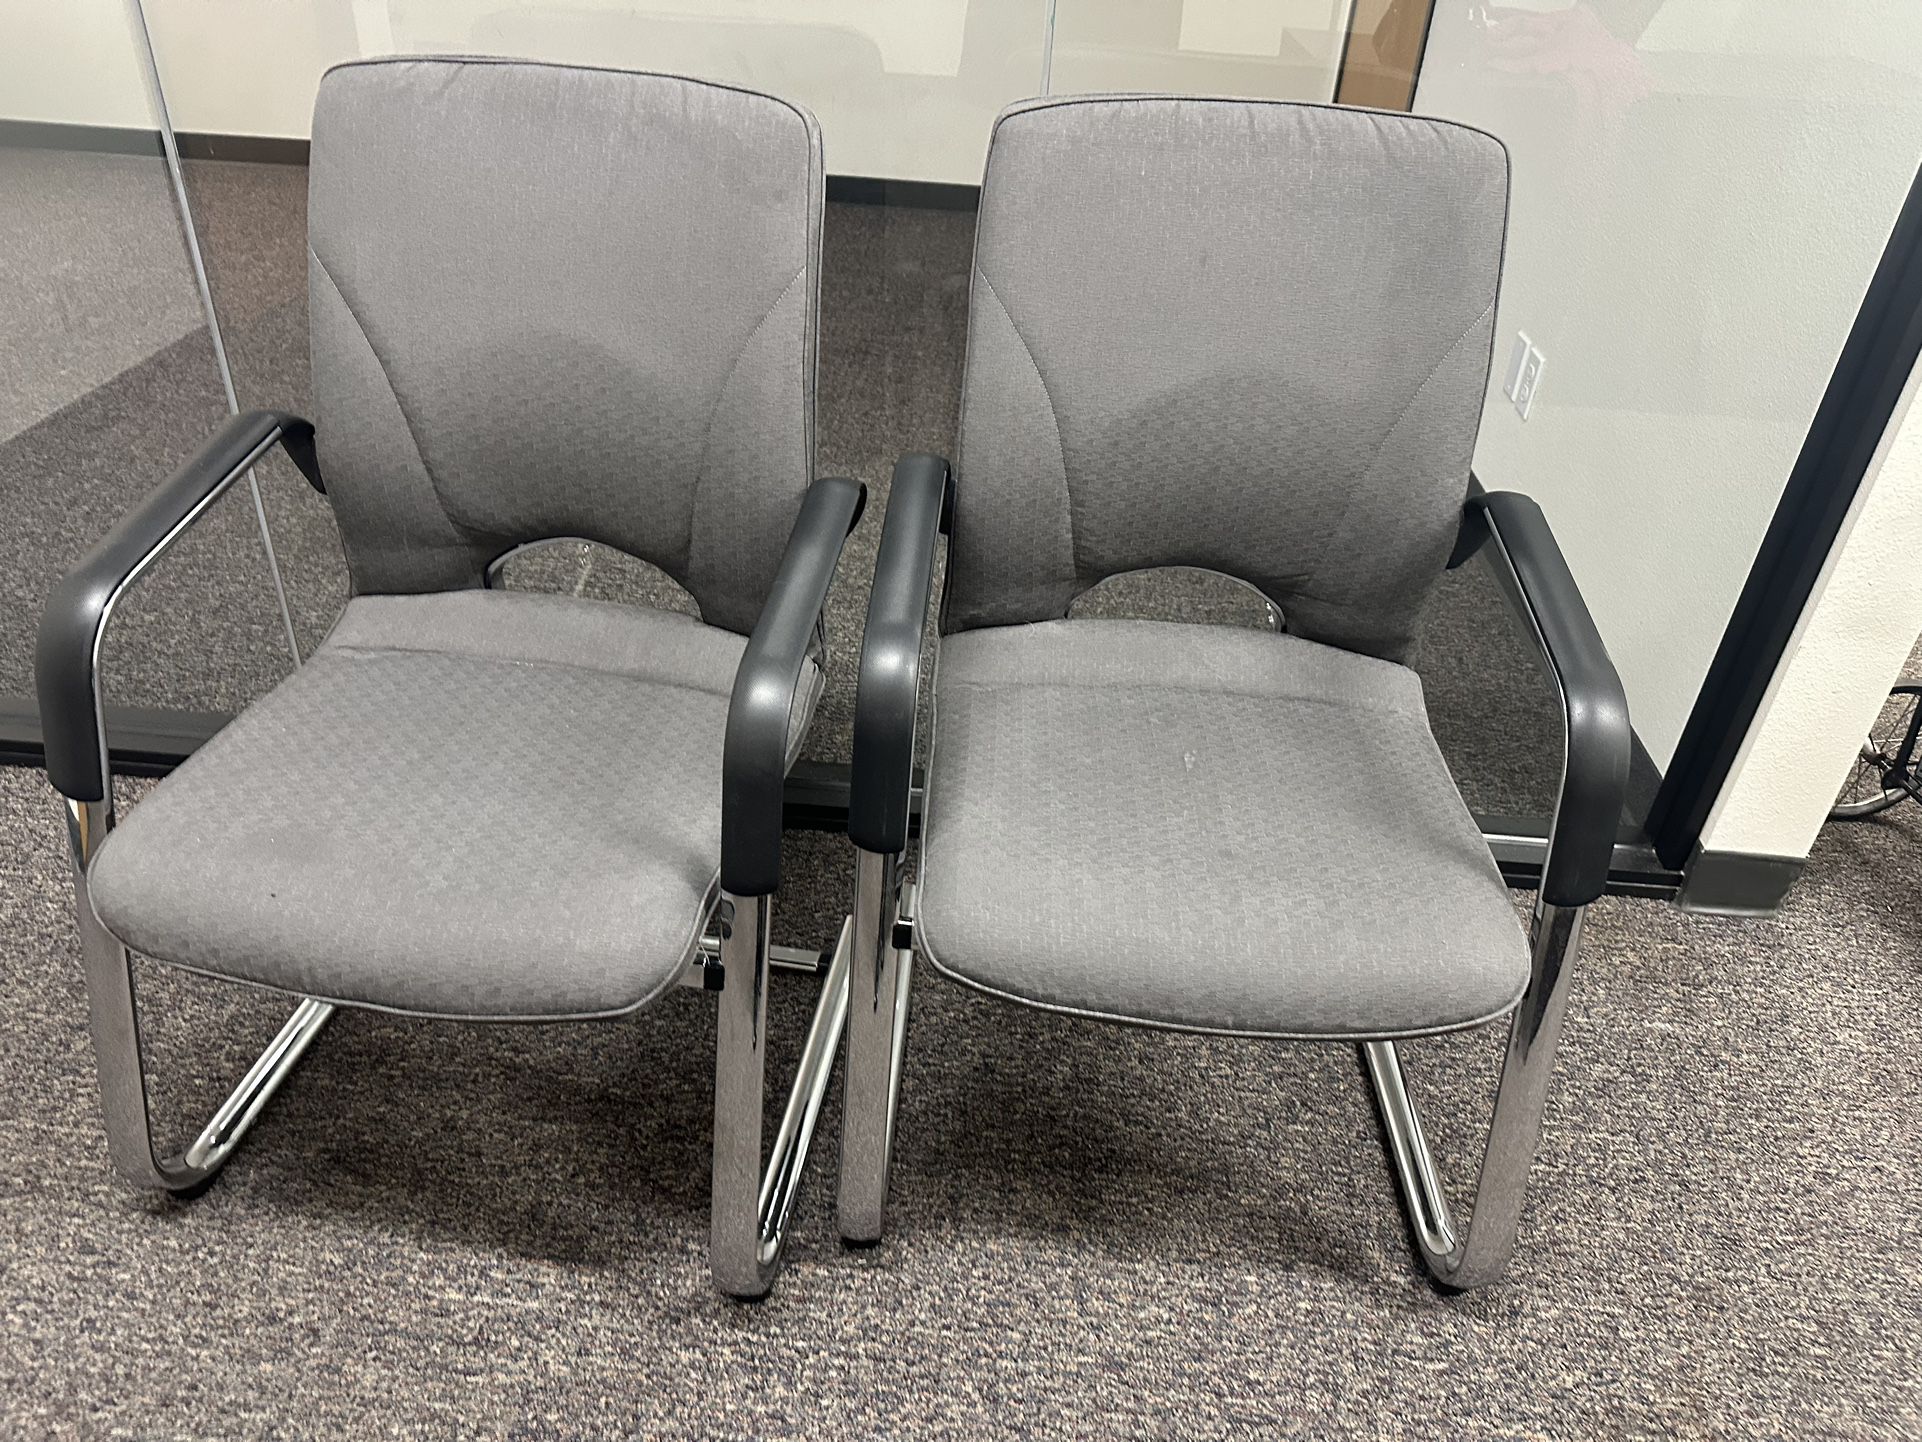 FREE Office Furniture. Must Take All Items! San Diego , Murphy Canyon Road